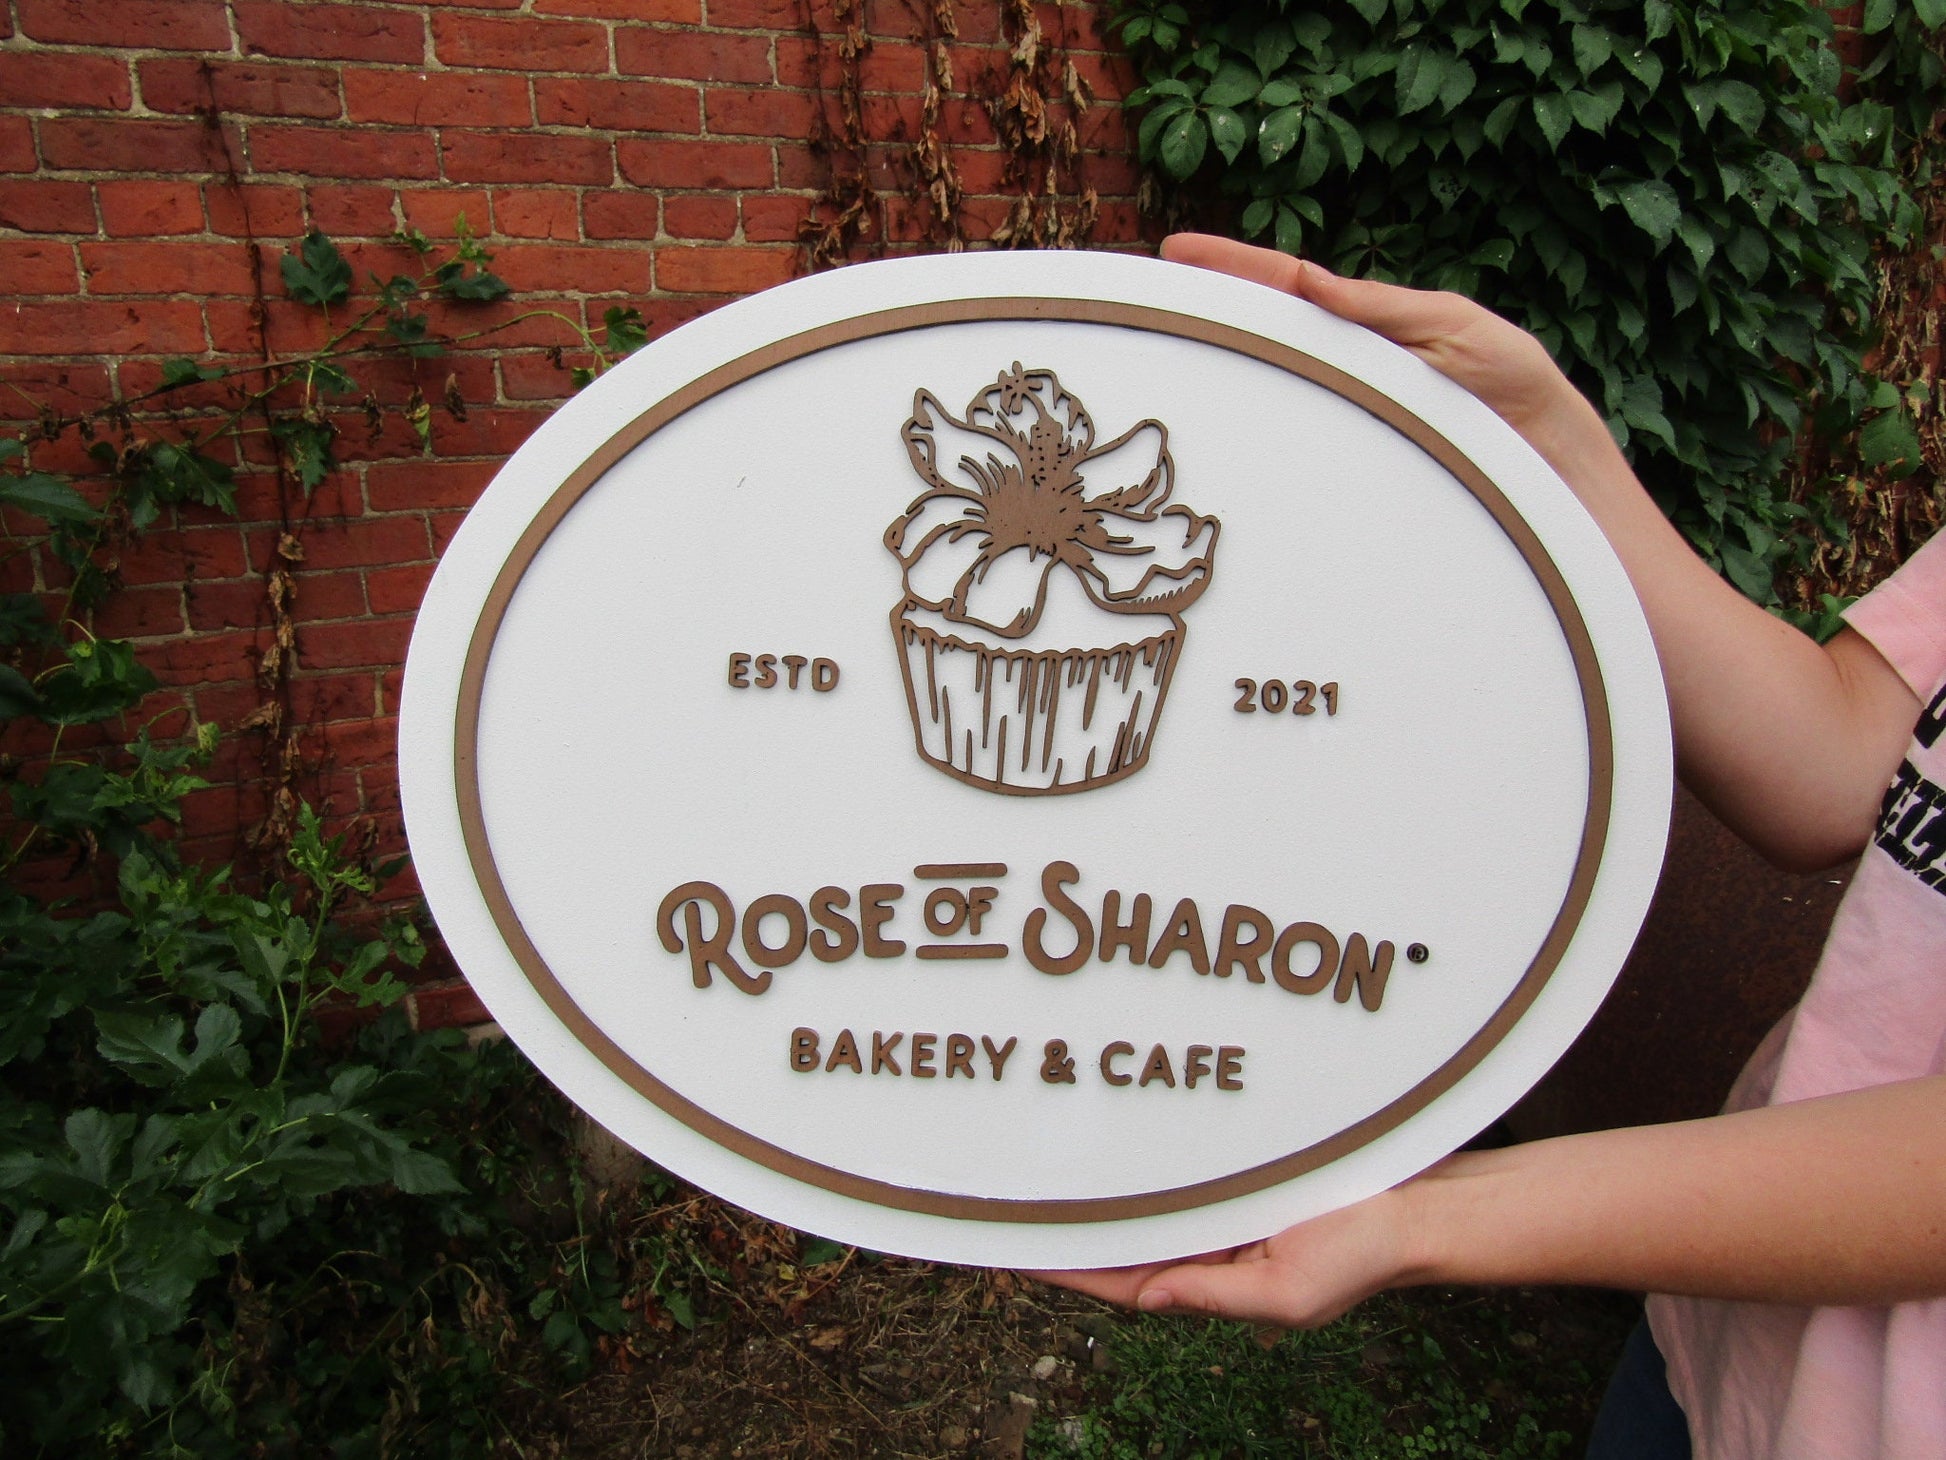 Custom Bakery And Cafe Sign Wooden Handmade Decor Cupcake Baker Rose of Sharon Your Logo Oval Commerical Signage Business Sign Restaurant